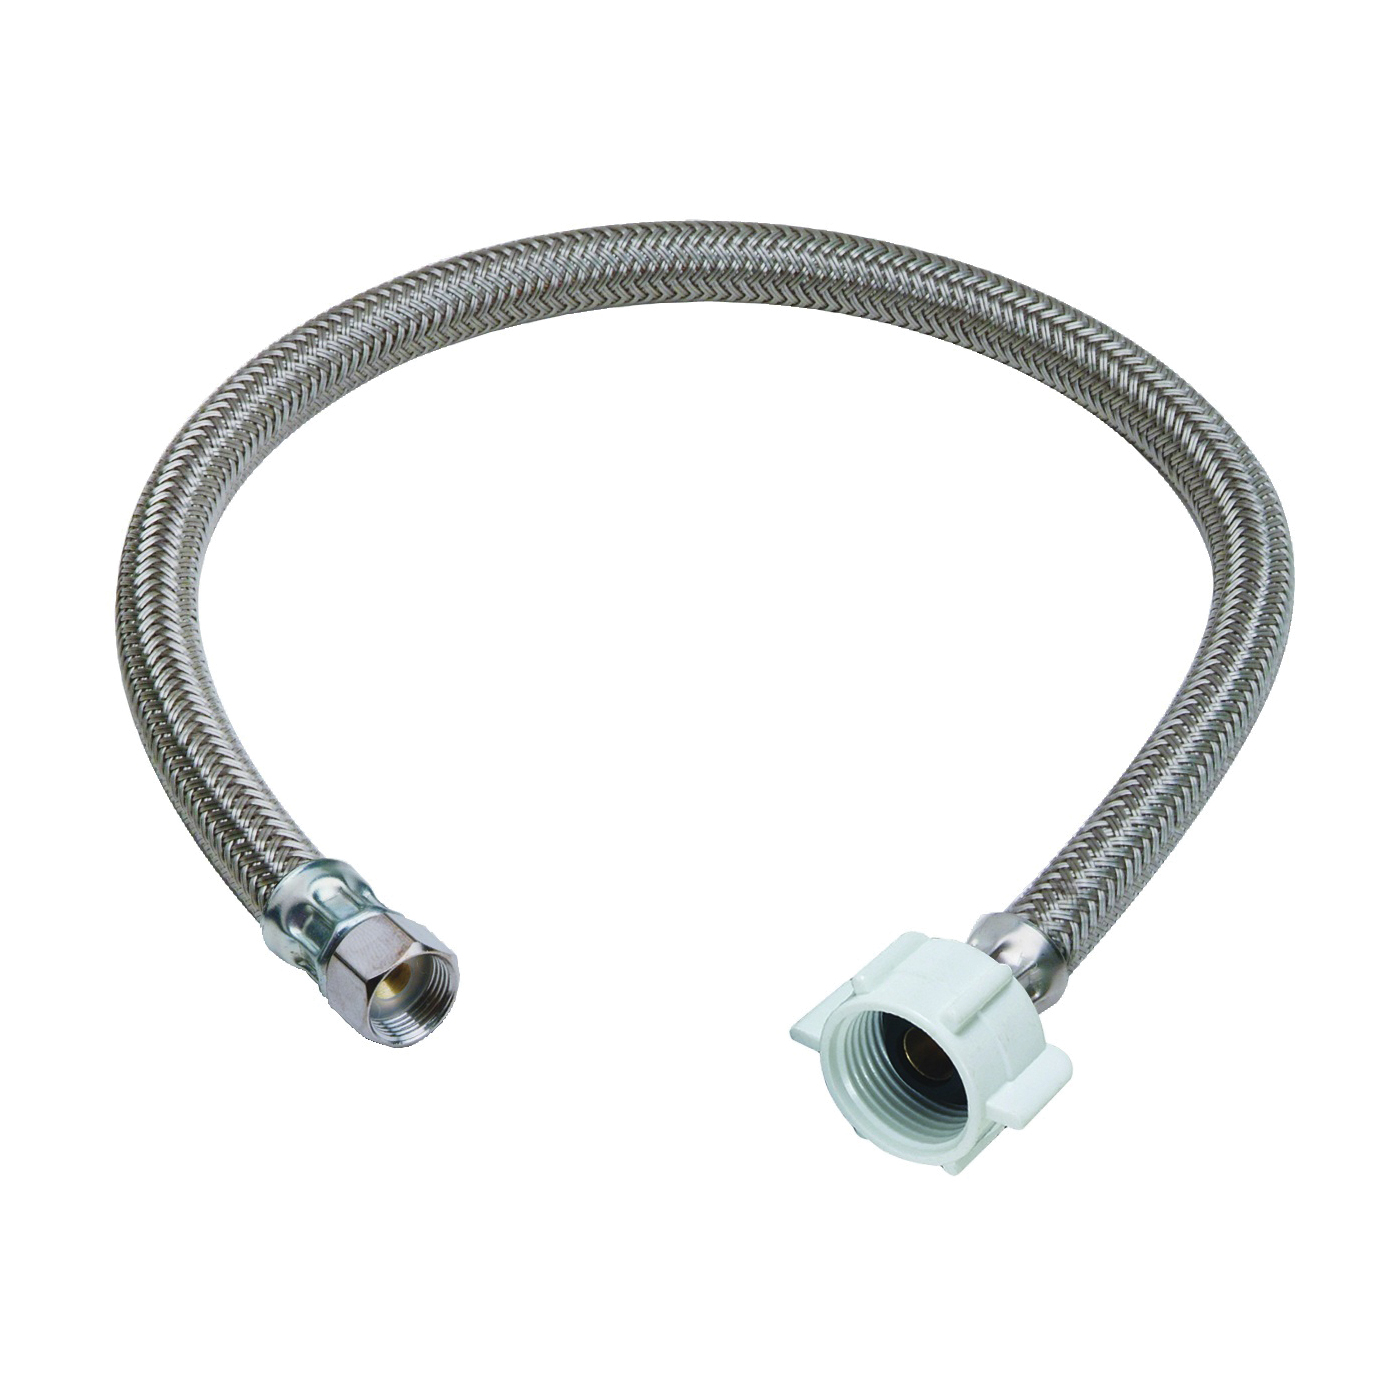 PSB857 Toilet Connector, 3/8 in Inlet, Compression Inlet, 7/8 in Outlet, Ballcock Outlet, Stainless Steel, 20 in L